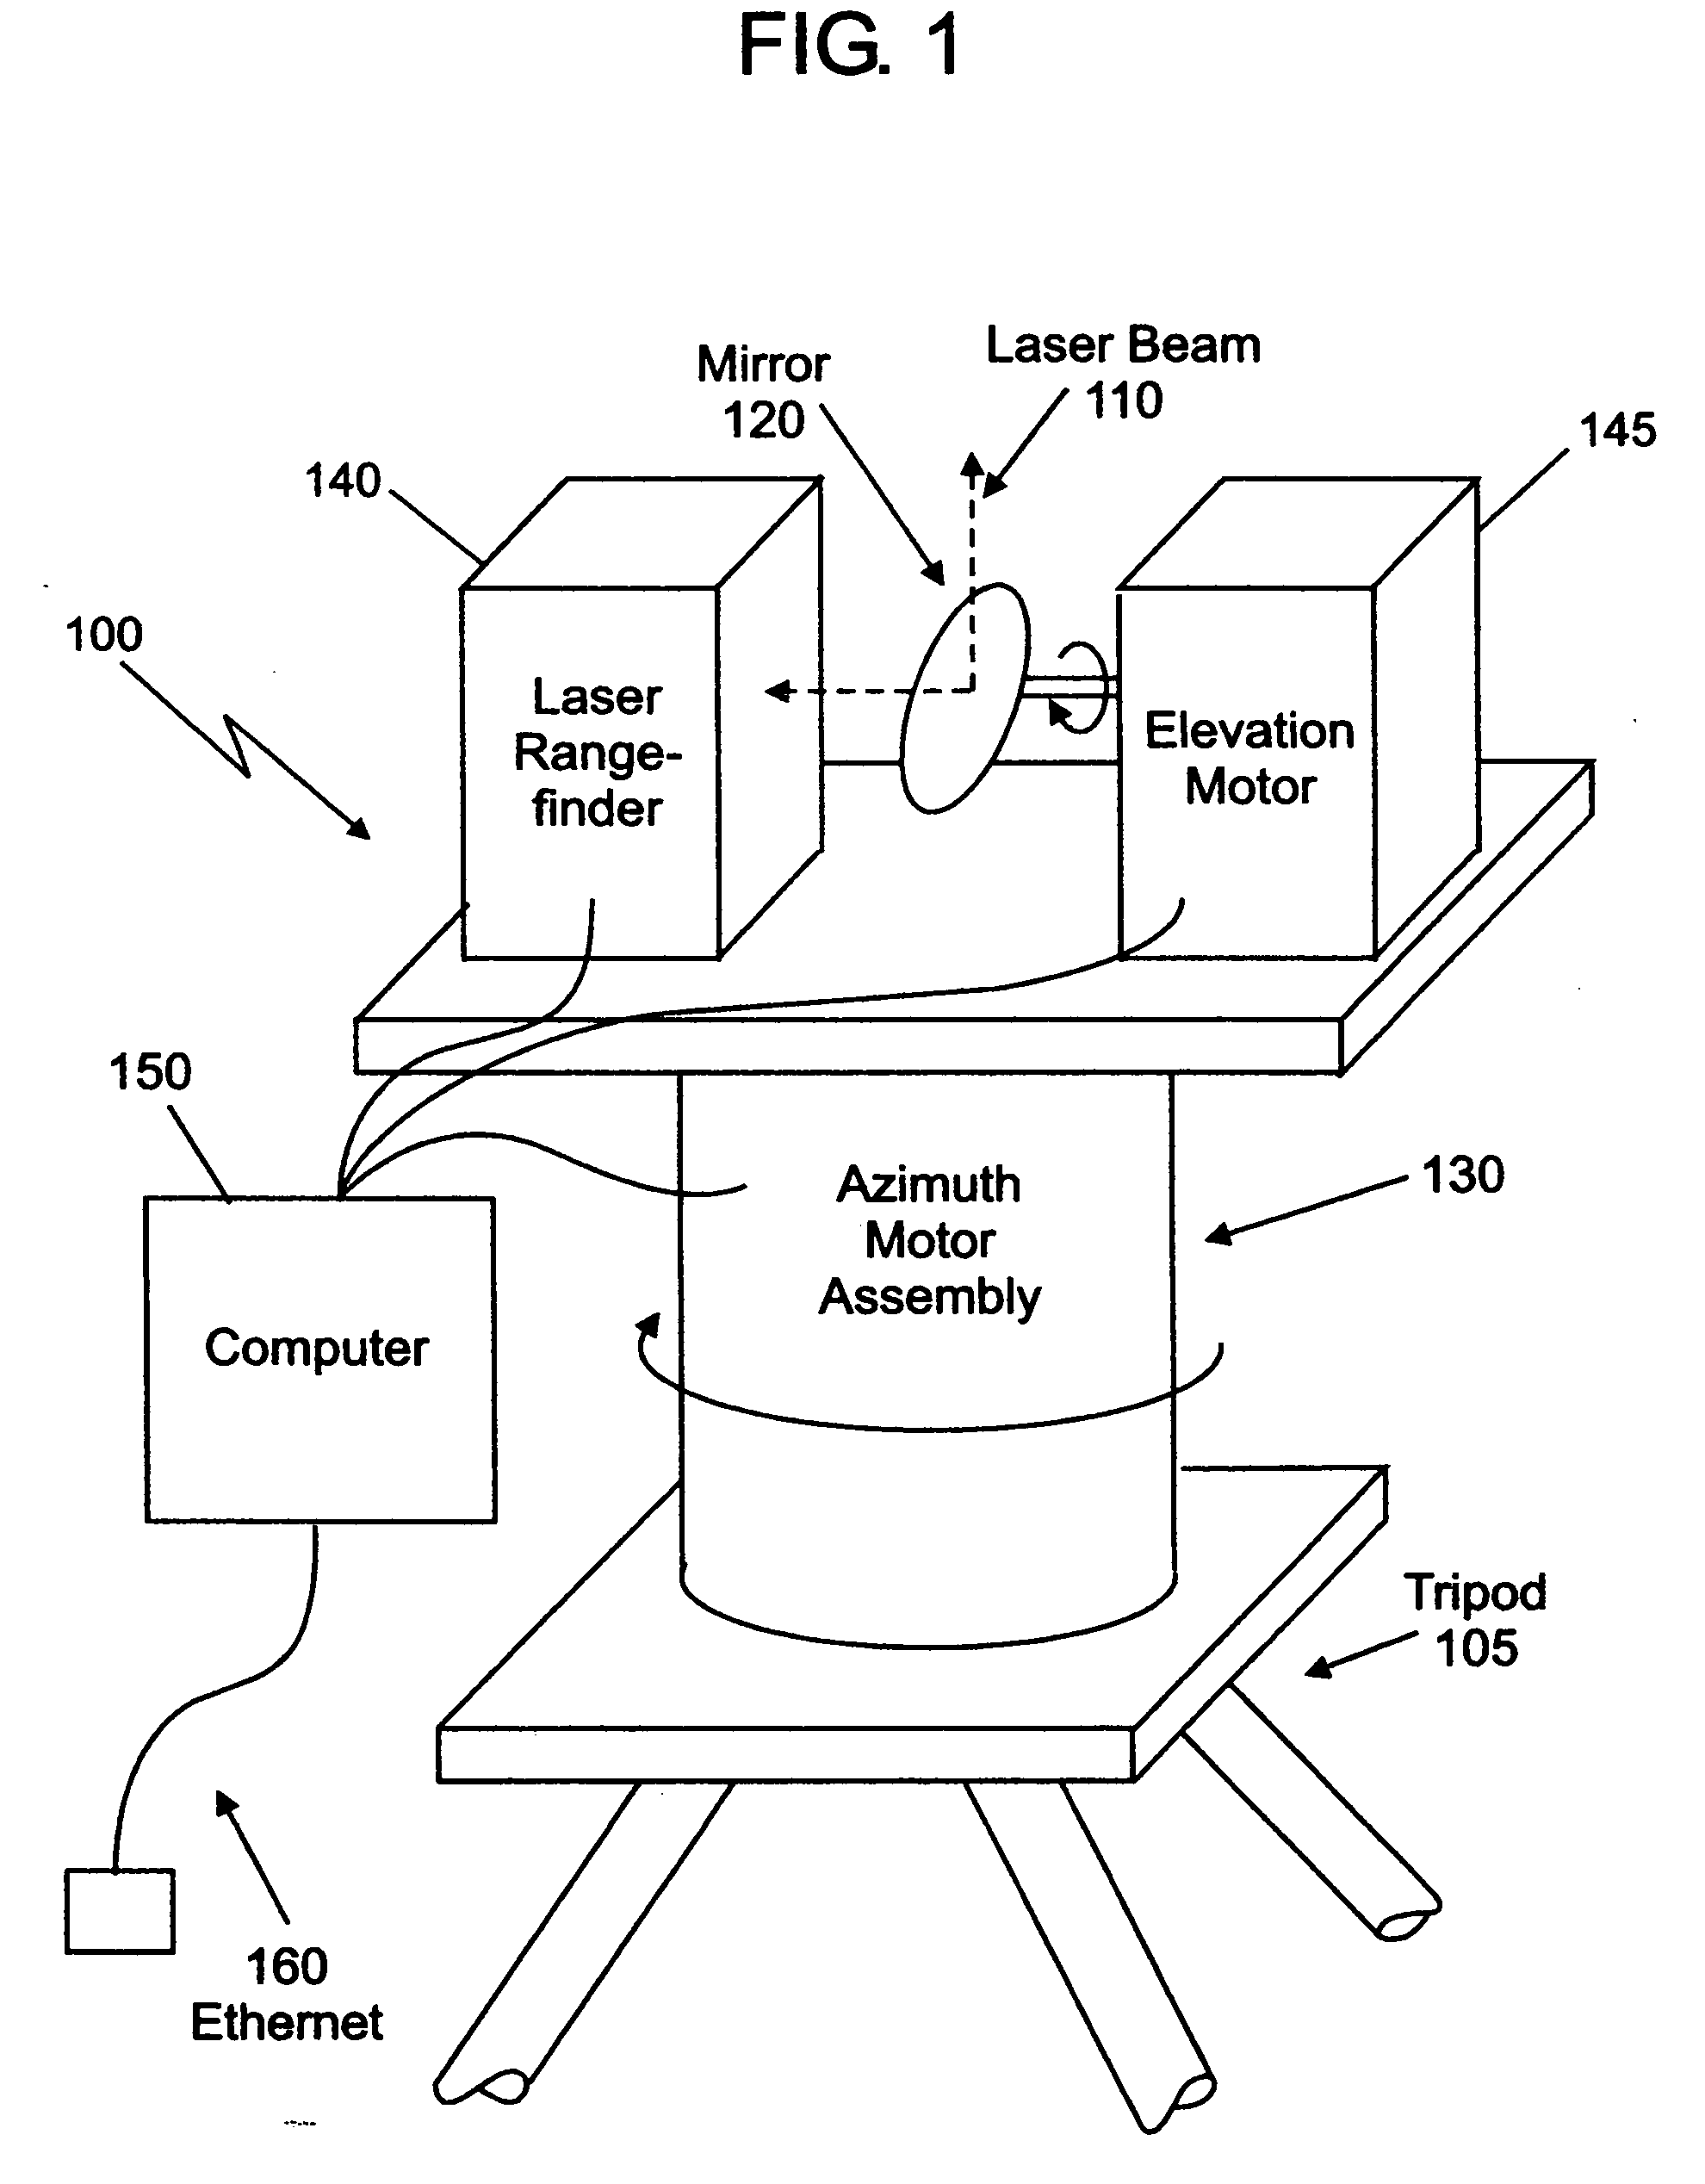 Method and apparatus for making and displaying measurements based upon multiple 3D rangefinder data sets